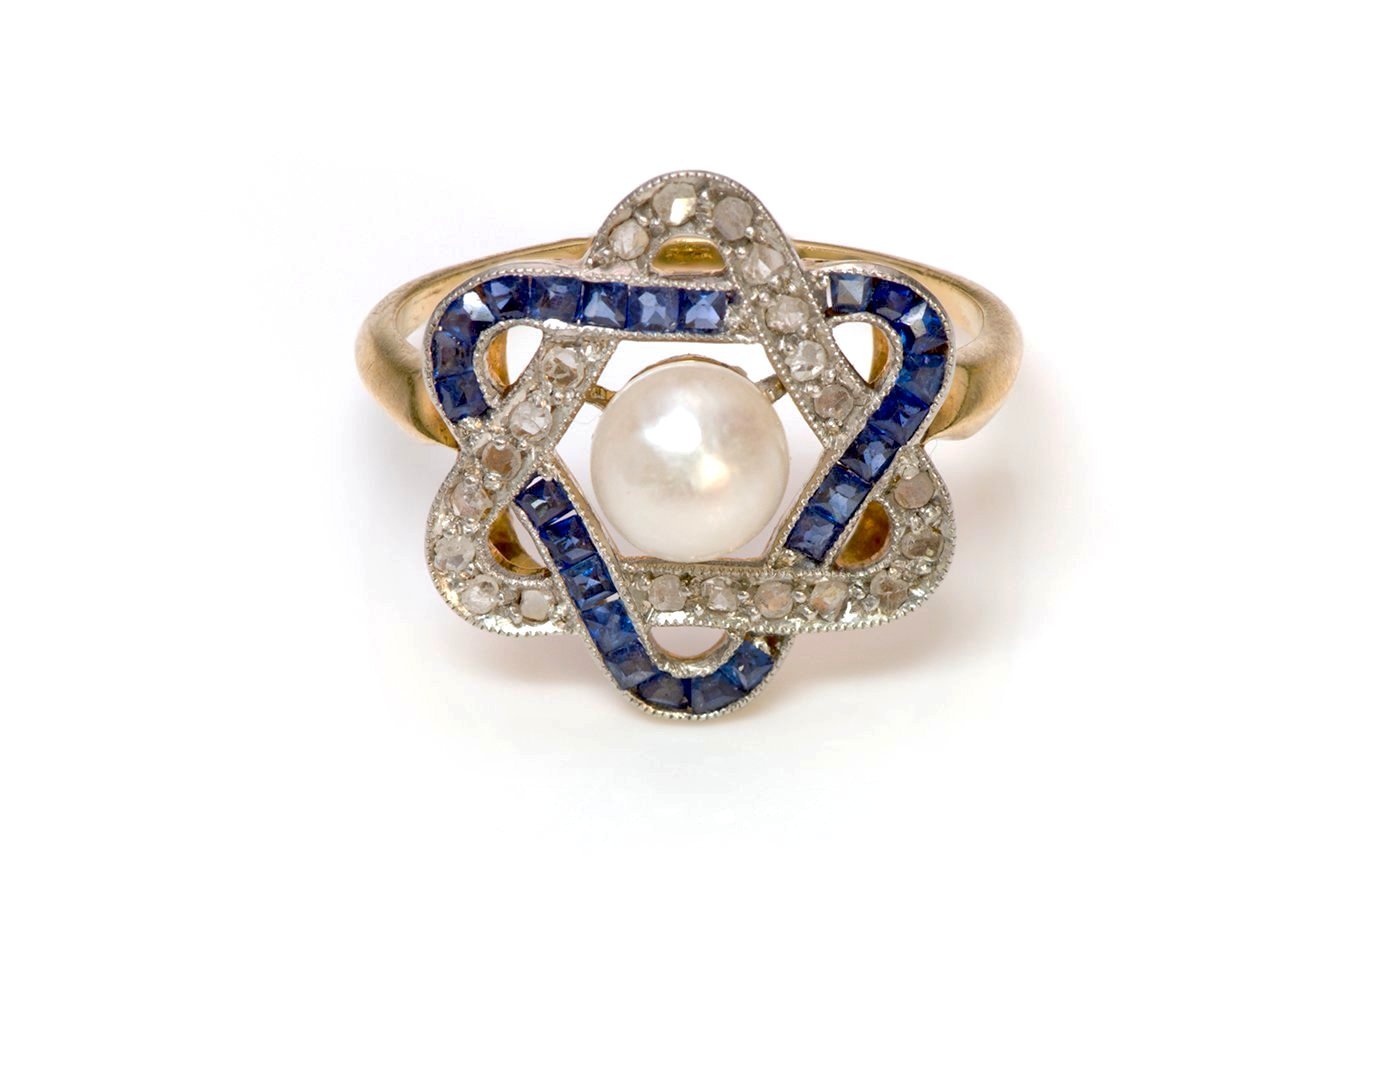 Antique Edwardian Sapphire Diamond Pearl 18K Gold Ring - DSF Antique Jewelry